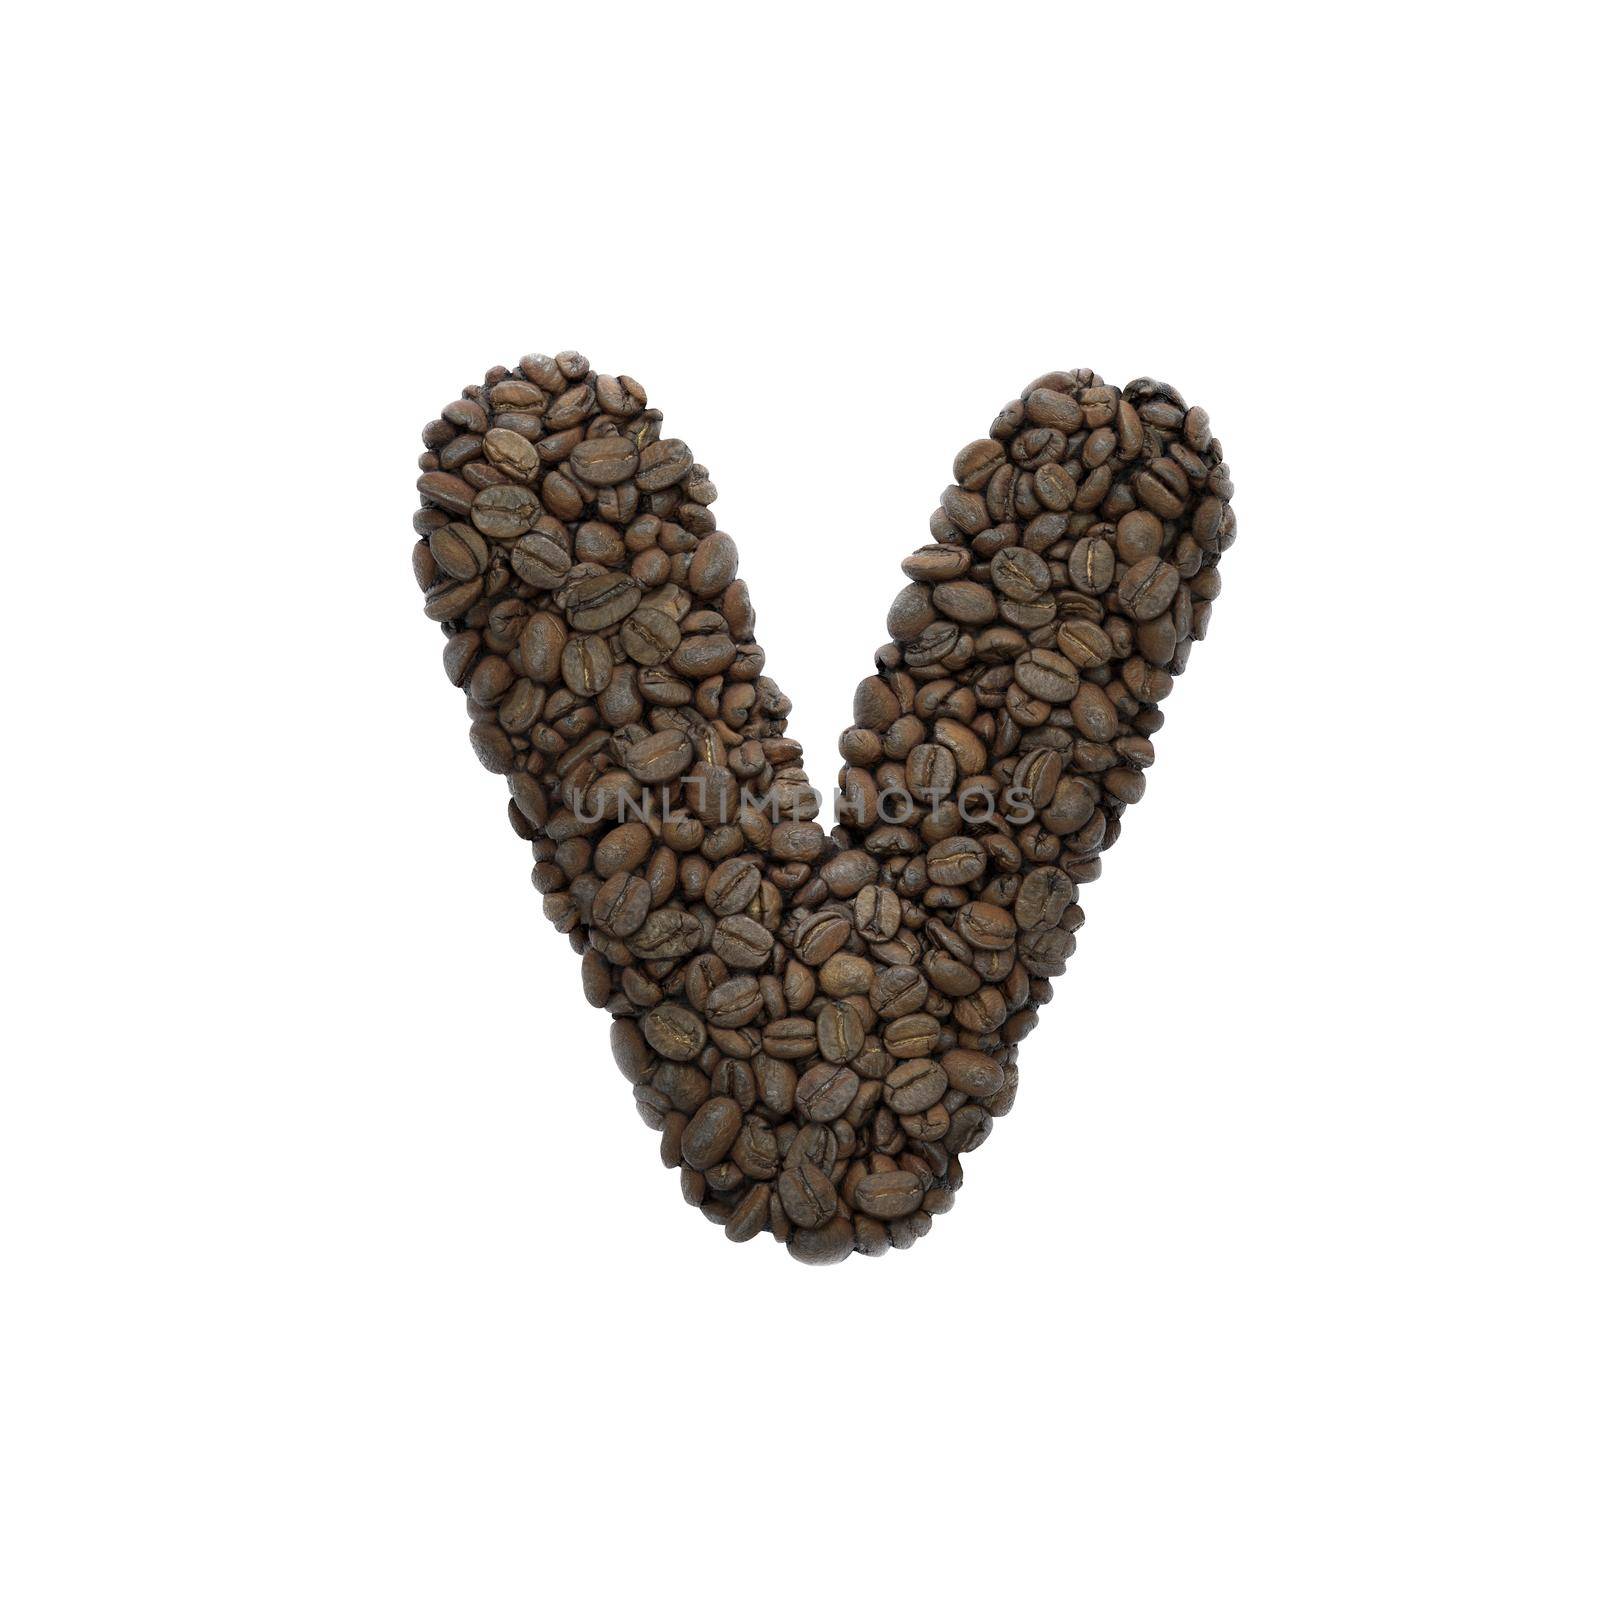 Coffee letter V - Small 3d roasted beans font - Suitable for Coffee, energy or insomnia related subjects by chrisroll